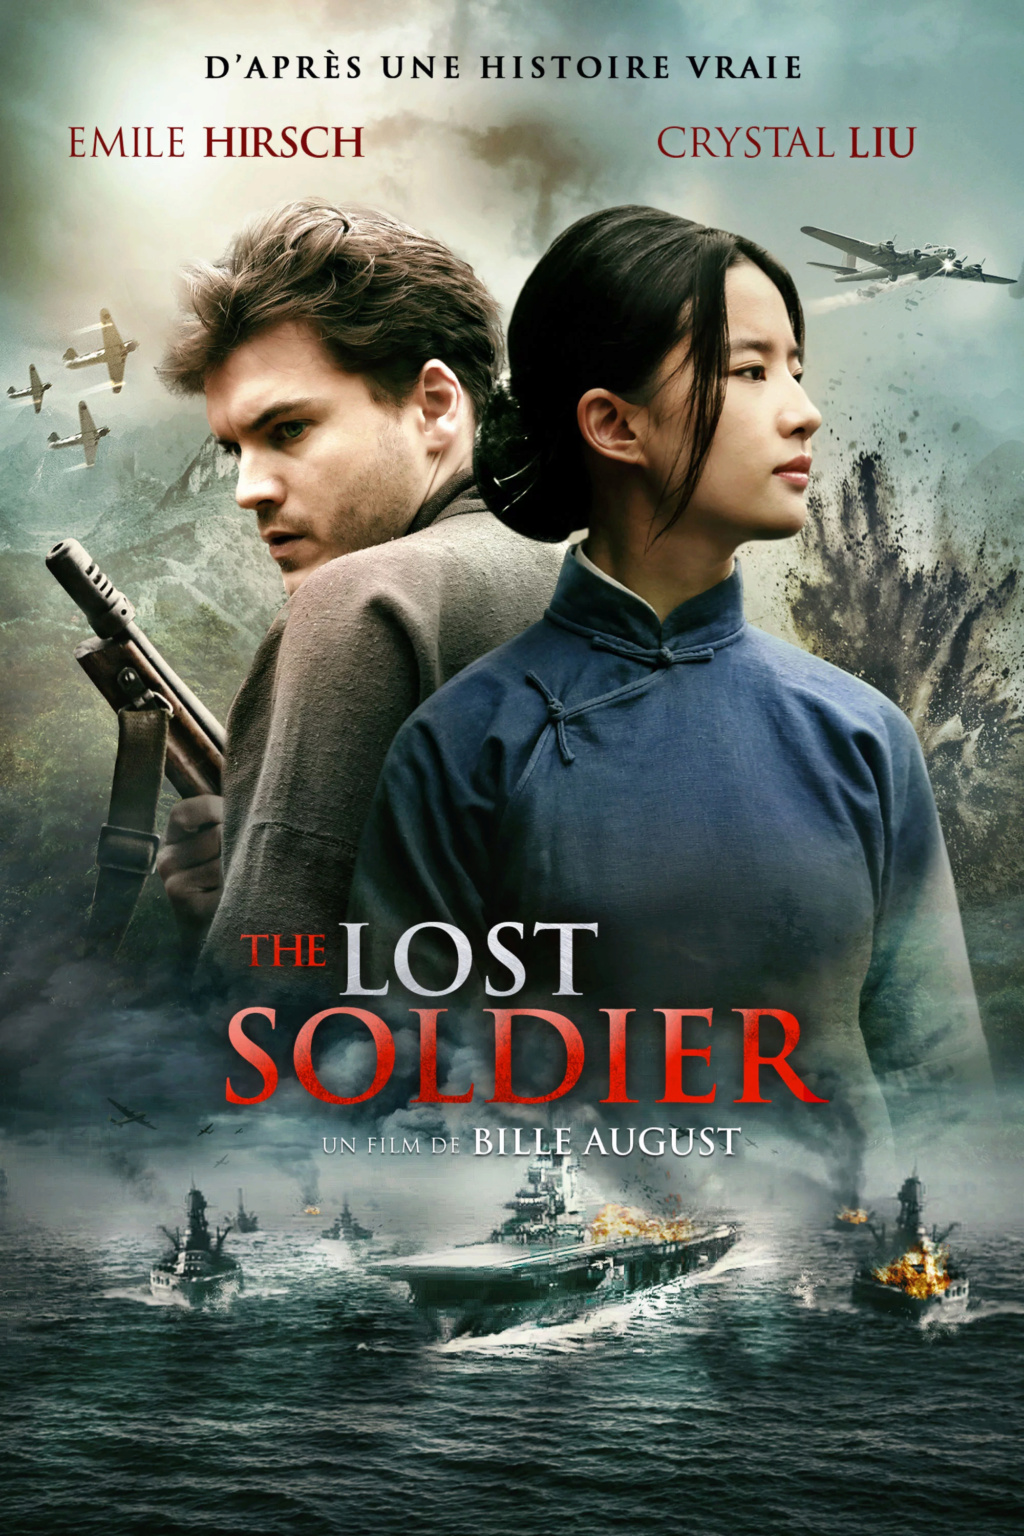 The Lost Soldier: 06964310